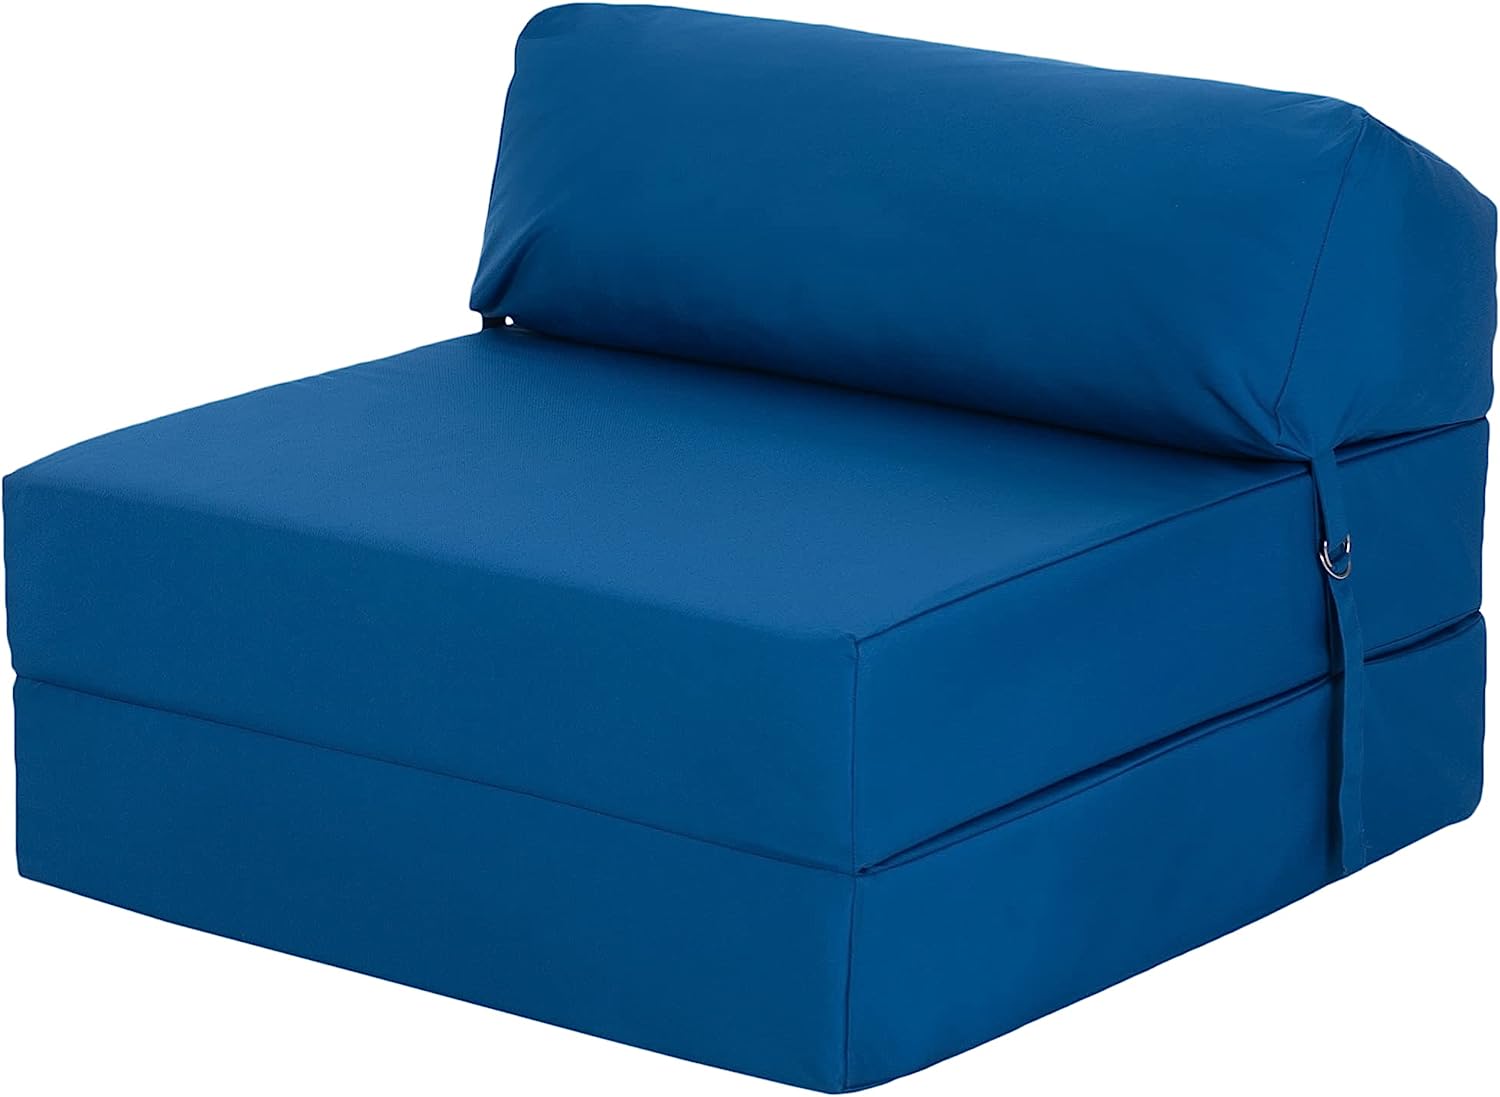 Fold Out Z Bed Chair Cover Blue